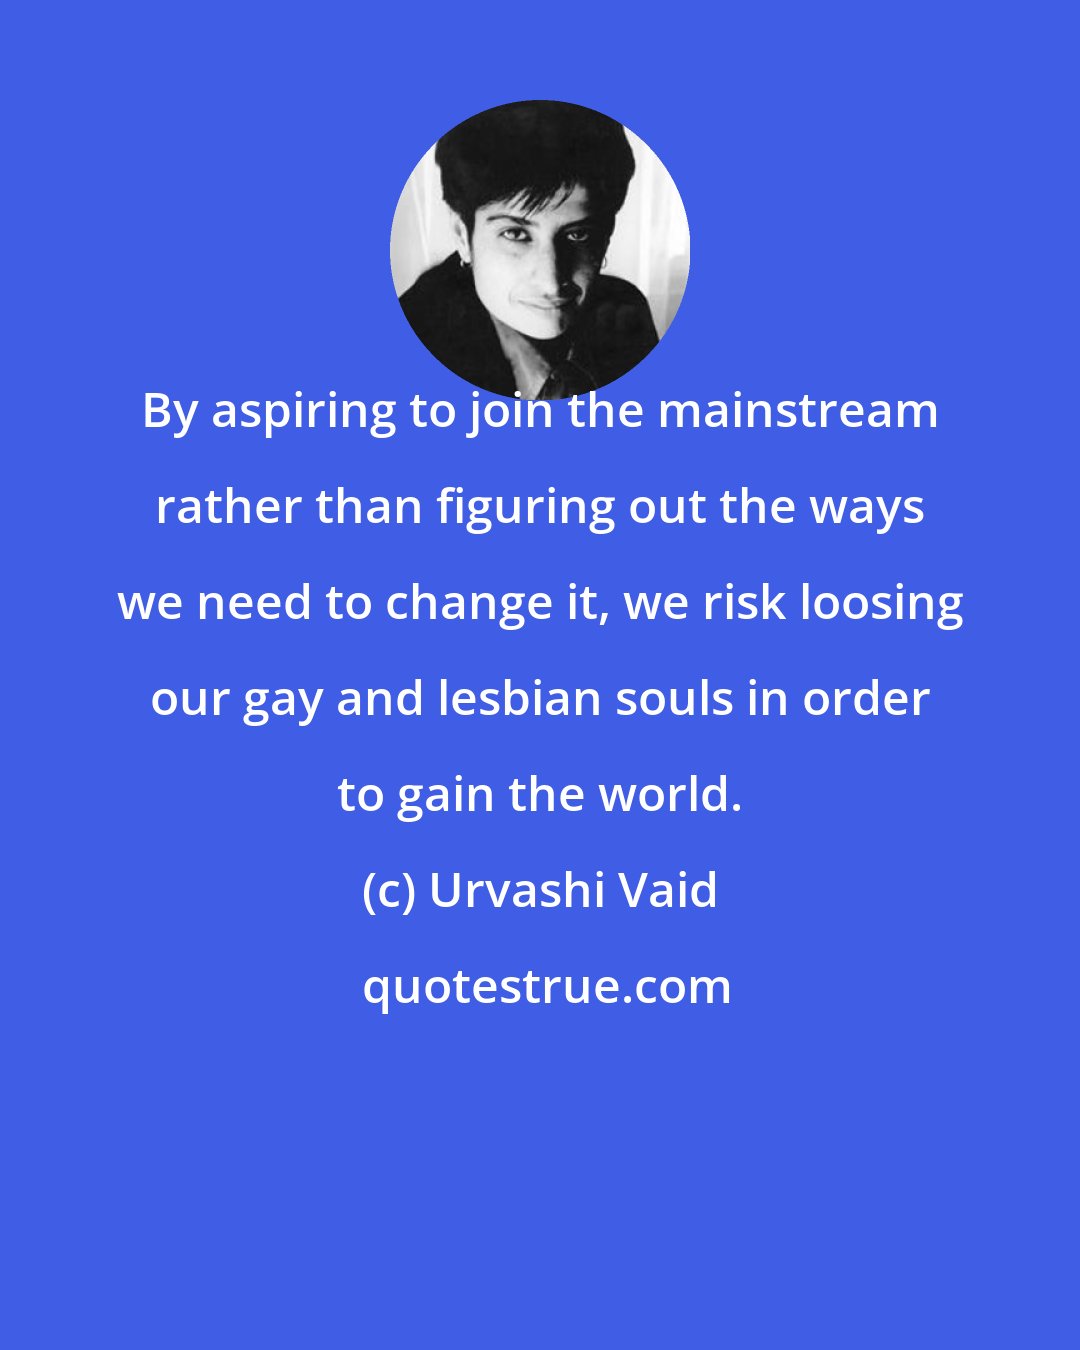 Urvashi Vaid: By aspiring to join the mainstream rather than figuring out the ways we need to change it, we risk loosing our gay and lesbian souls in order to gain the world.